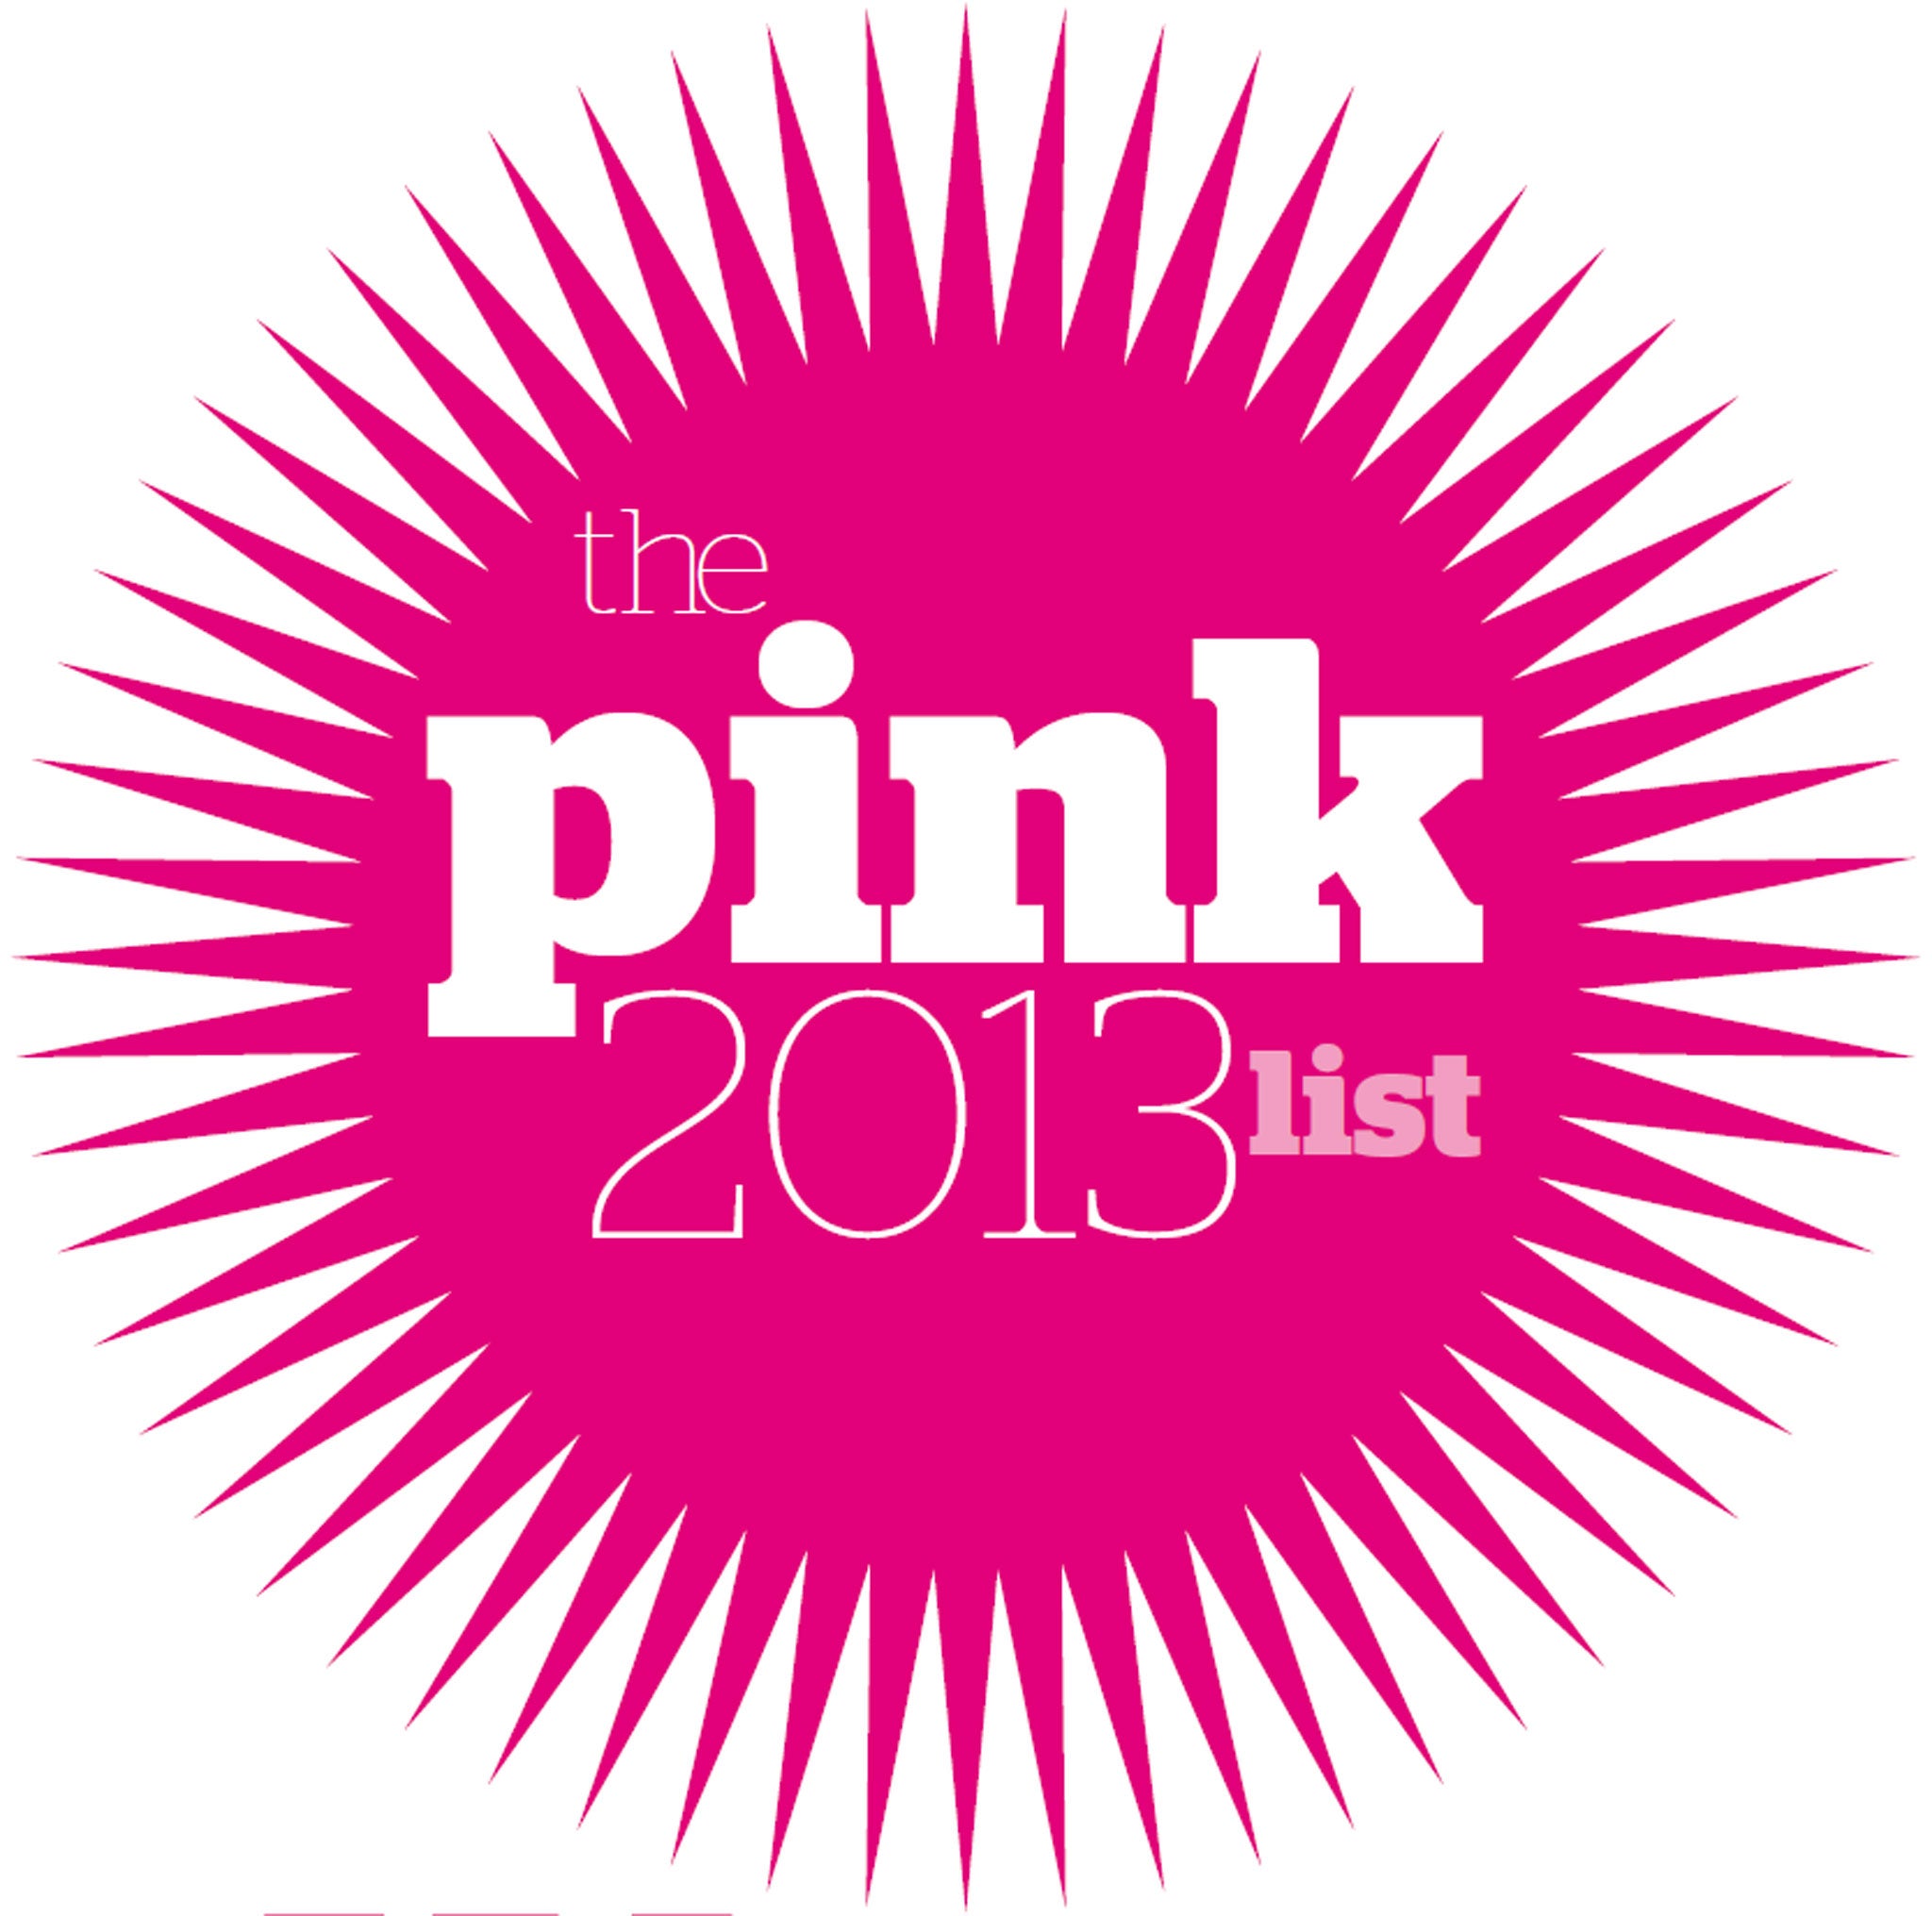 Bisexual Boy Porn - The Independent on Sunday's Pink List 2013 | The Independent